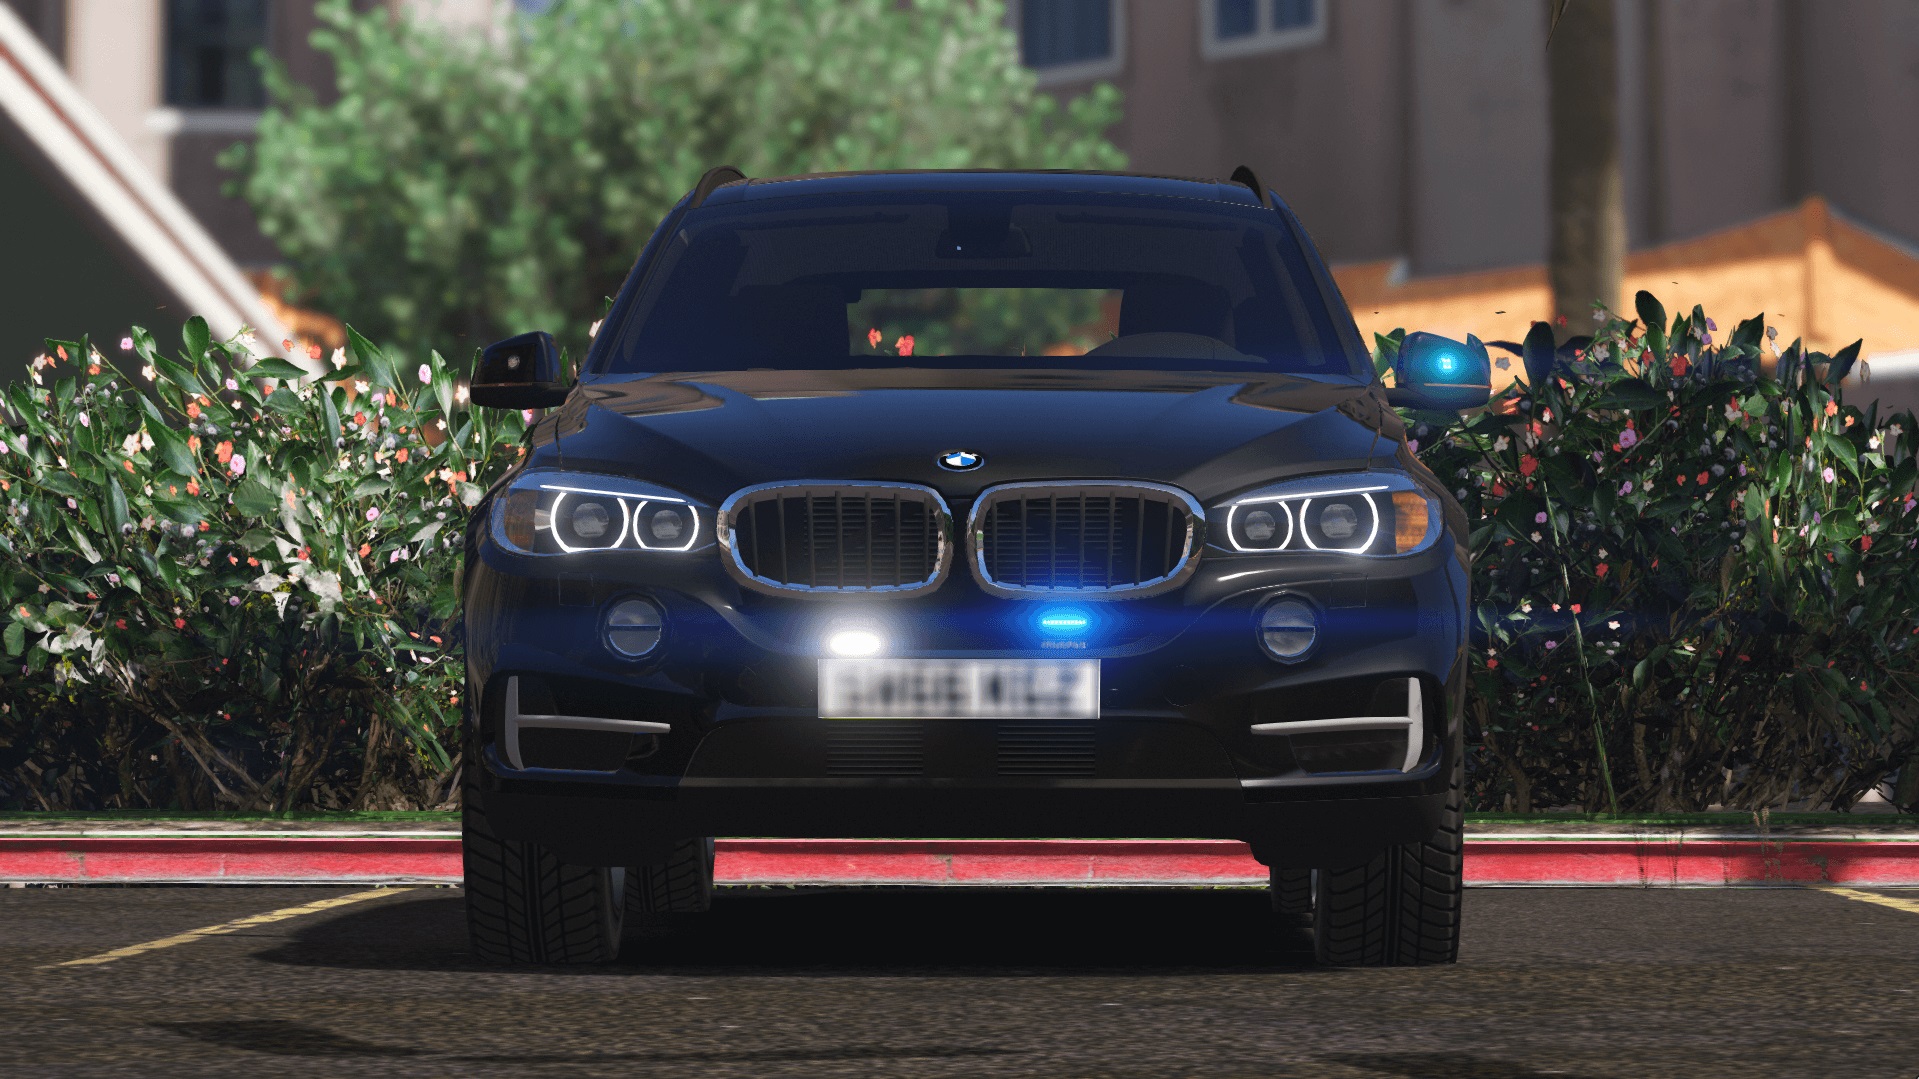 Hampshire Police - Unmarked Armed Response Vehicle - BMW X5 F15 [ELS] 1.0